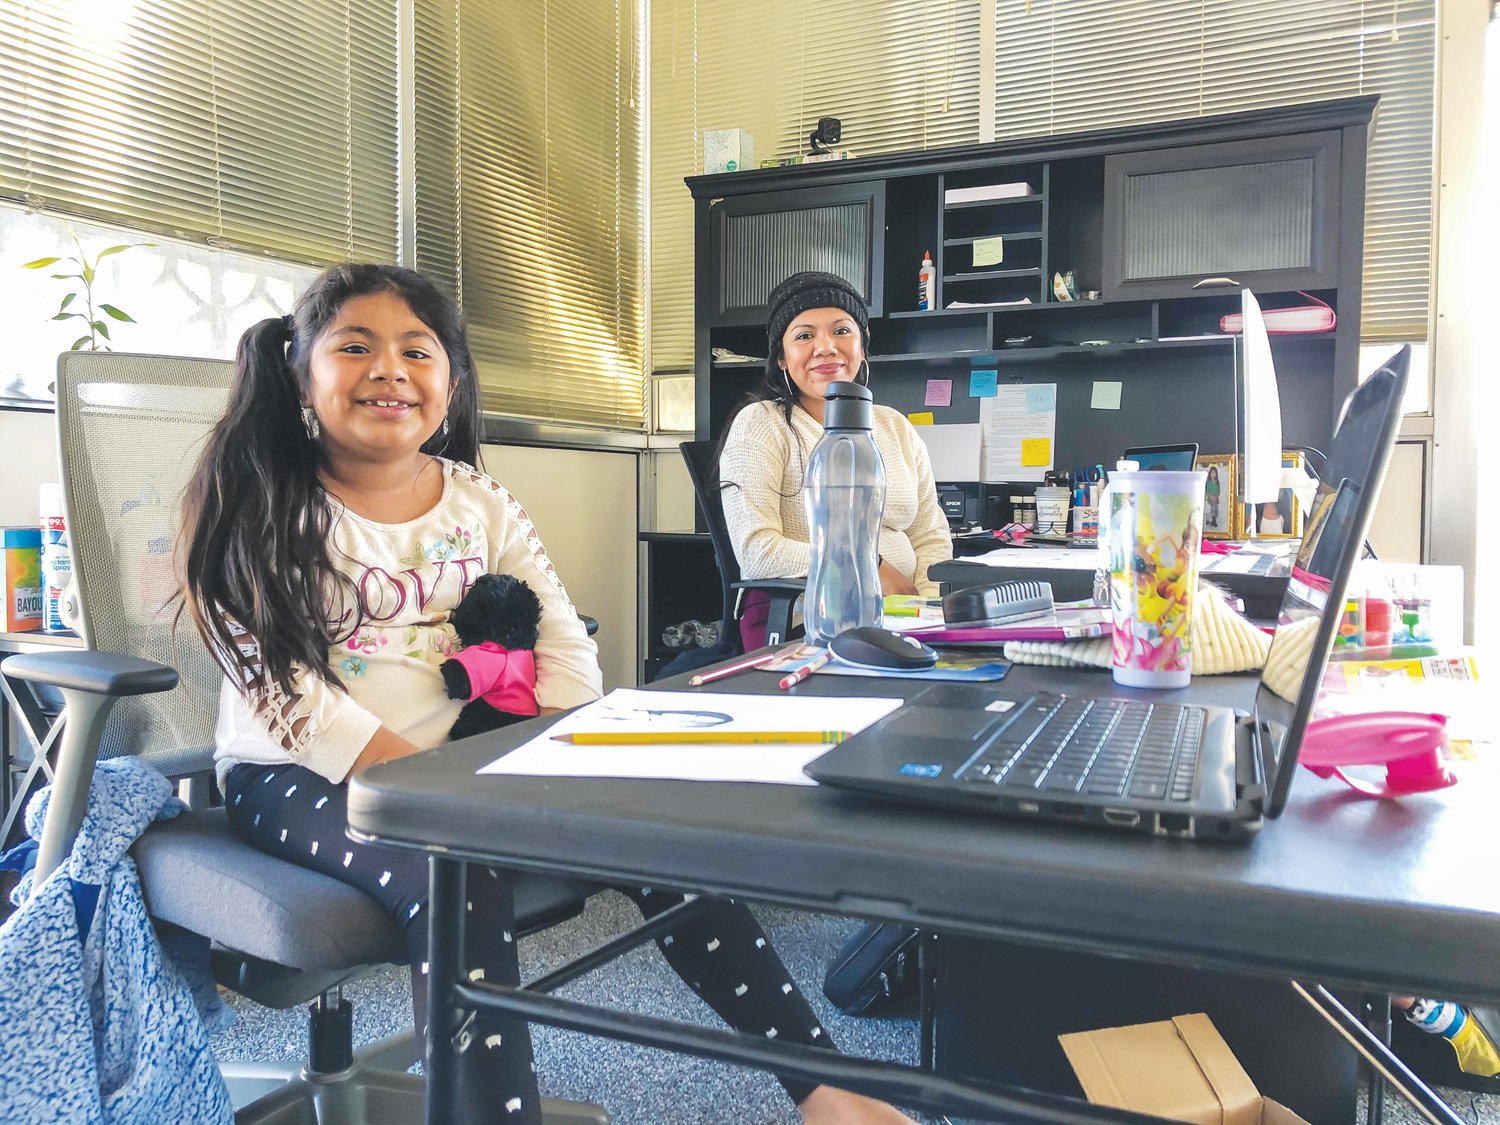 Jessica Hernández Guerrero, 29, brings her daughter to work with her every day in Siler City, where she works as an accountant for Warrior Steel Erection Corporation. Her daughter Hailey, a 2nd grader at Green Ridge Elementary in Biscoe, said she liked online school 'because you can turn off the camera and go to sleep.'